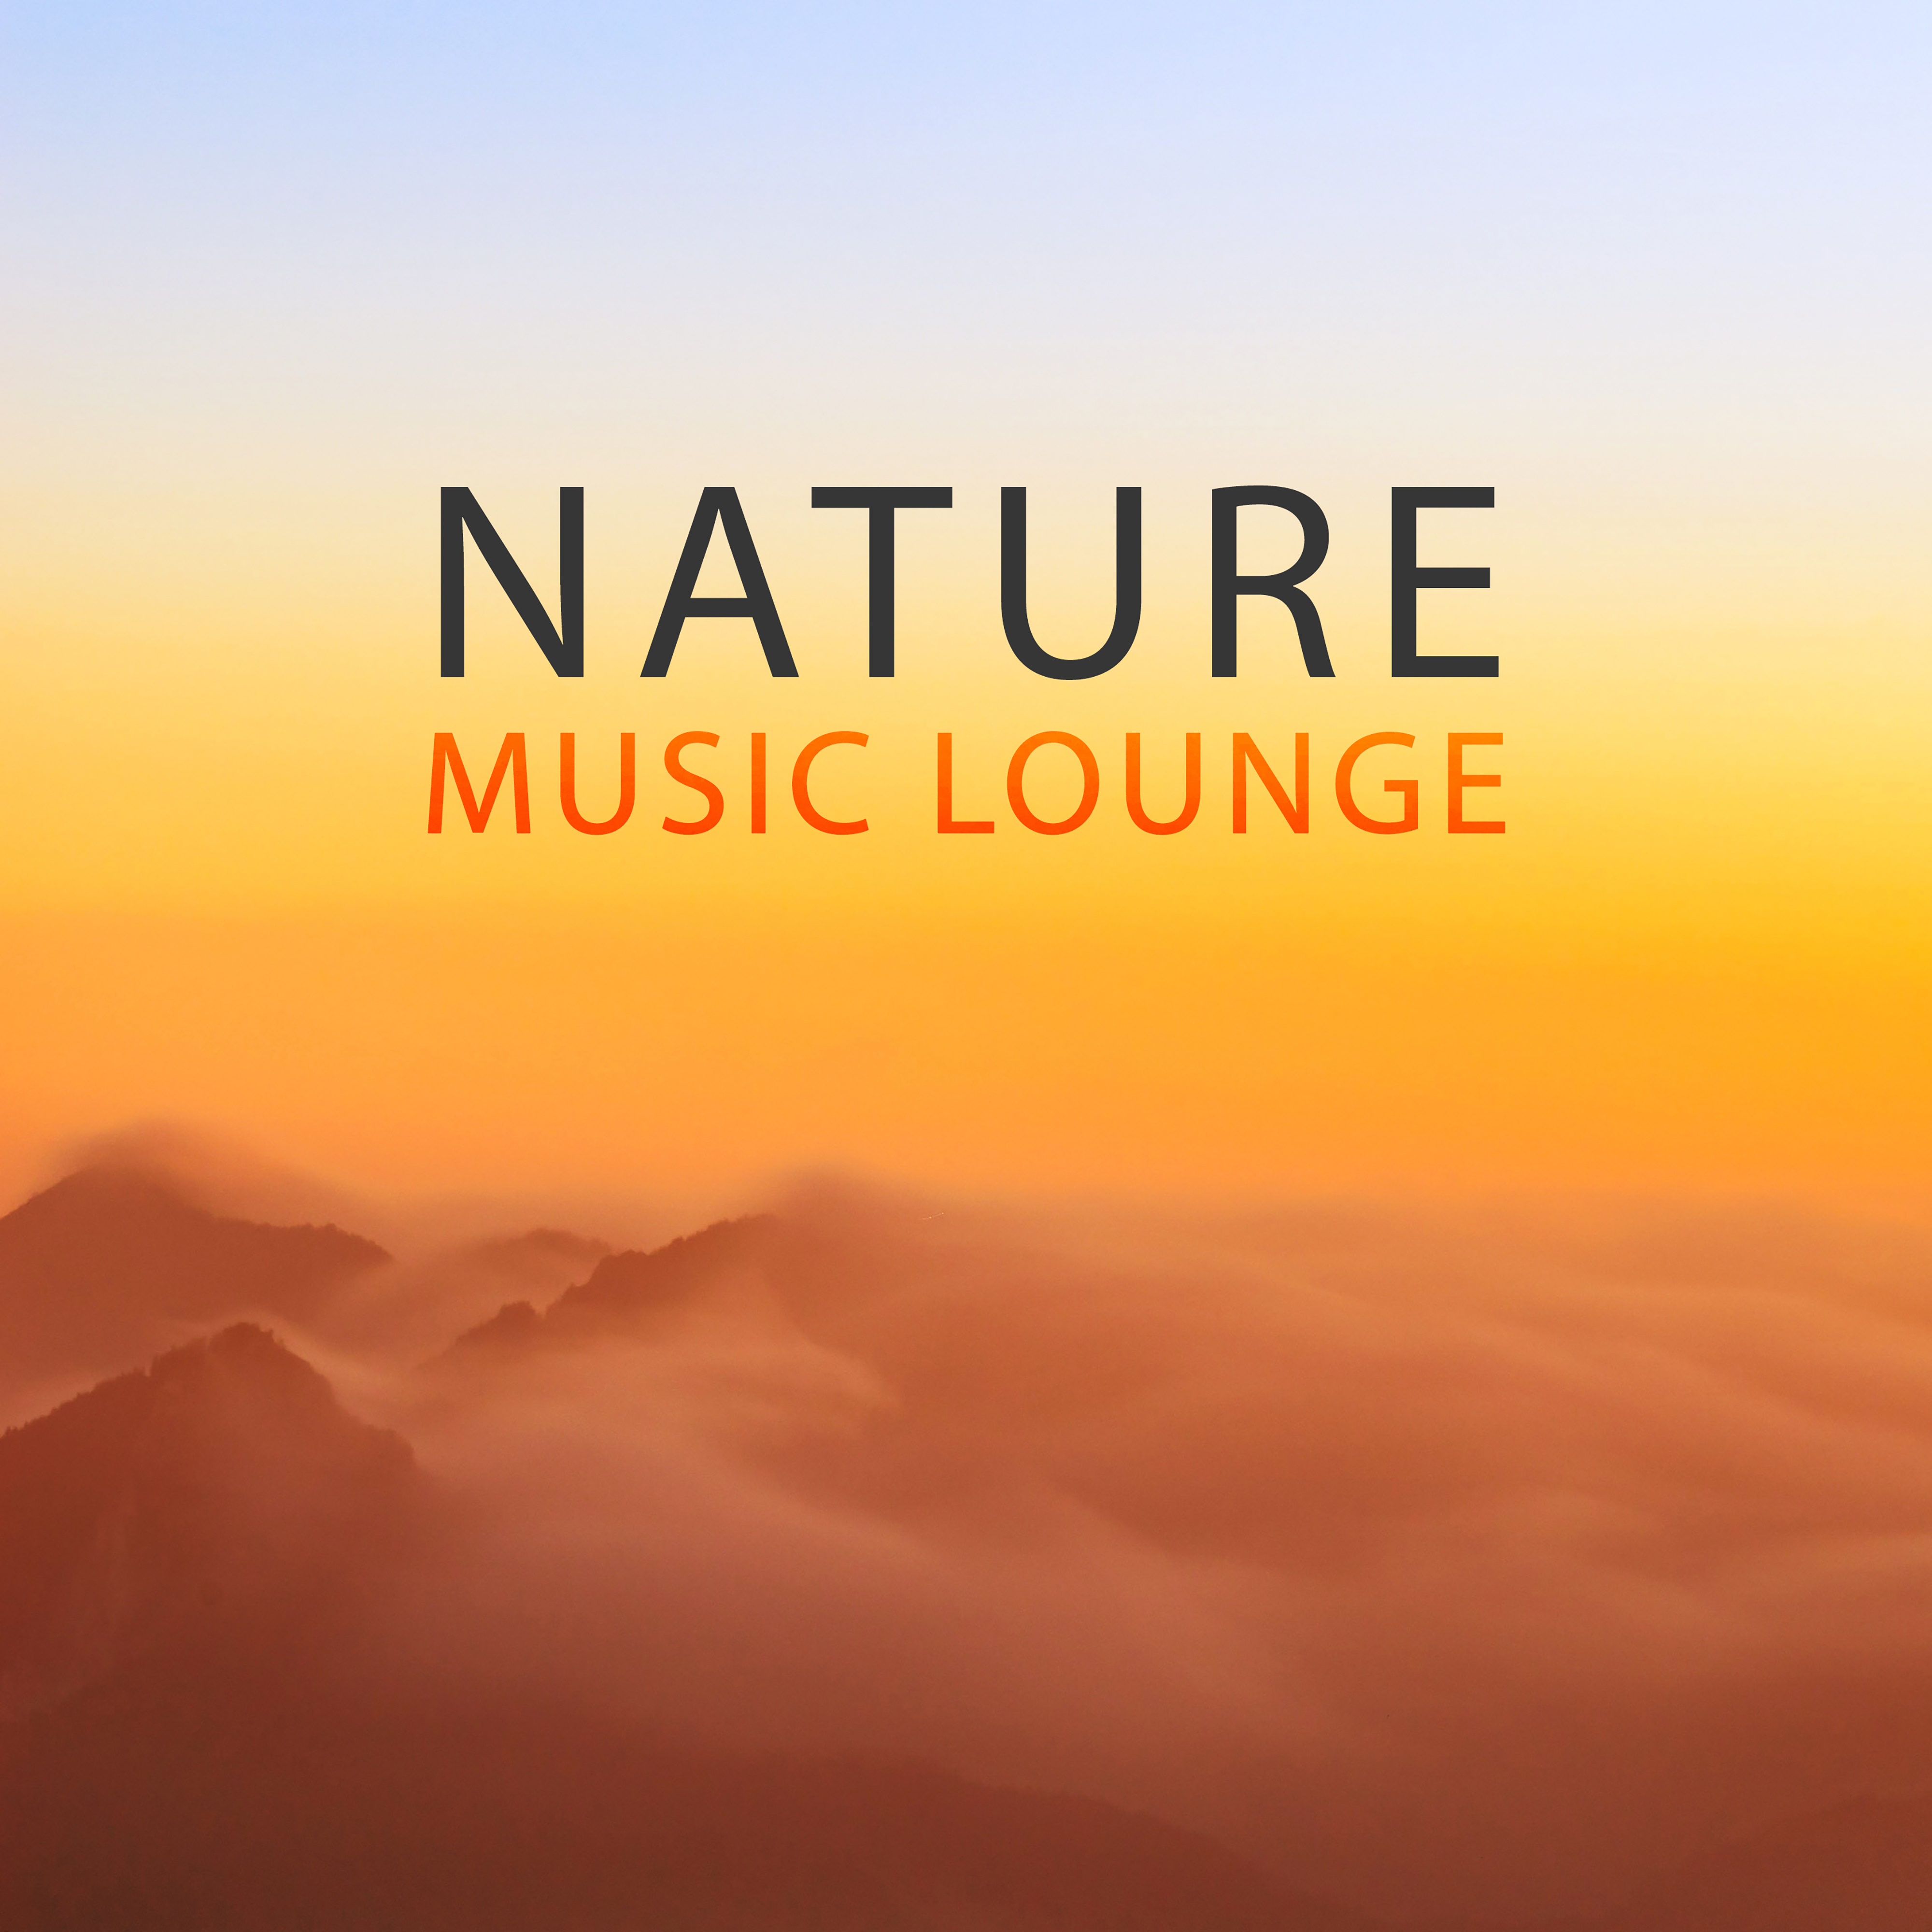 Nature Music Lounge  Calmning Sounds of Nature, New Age, Deep Relaxation, Relaxing Music Therapy